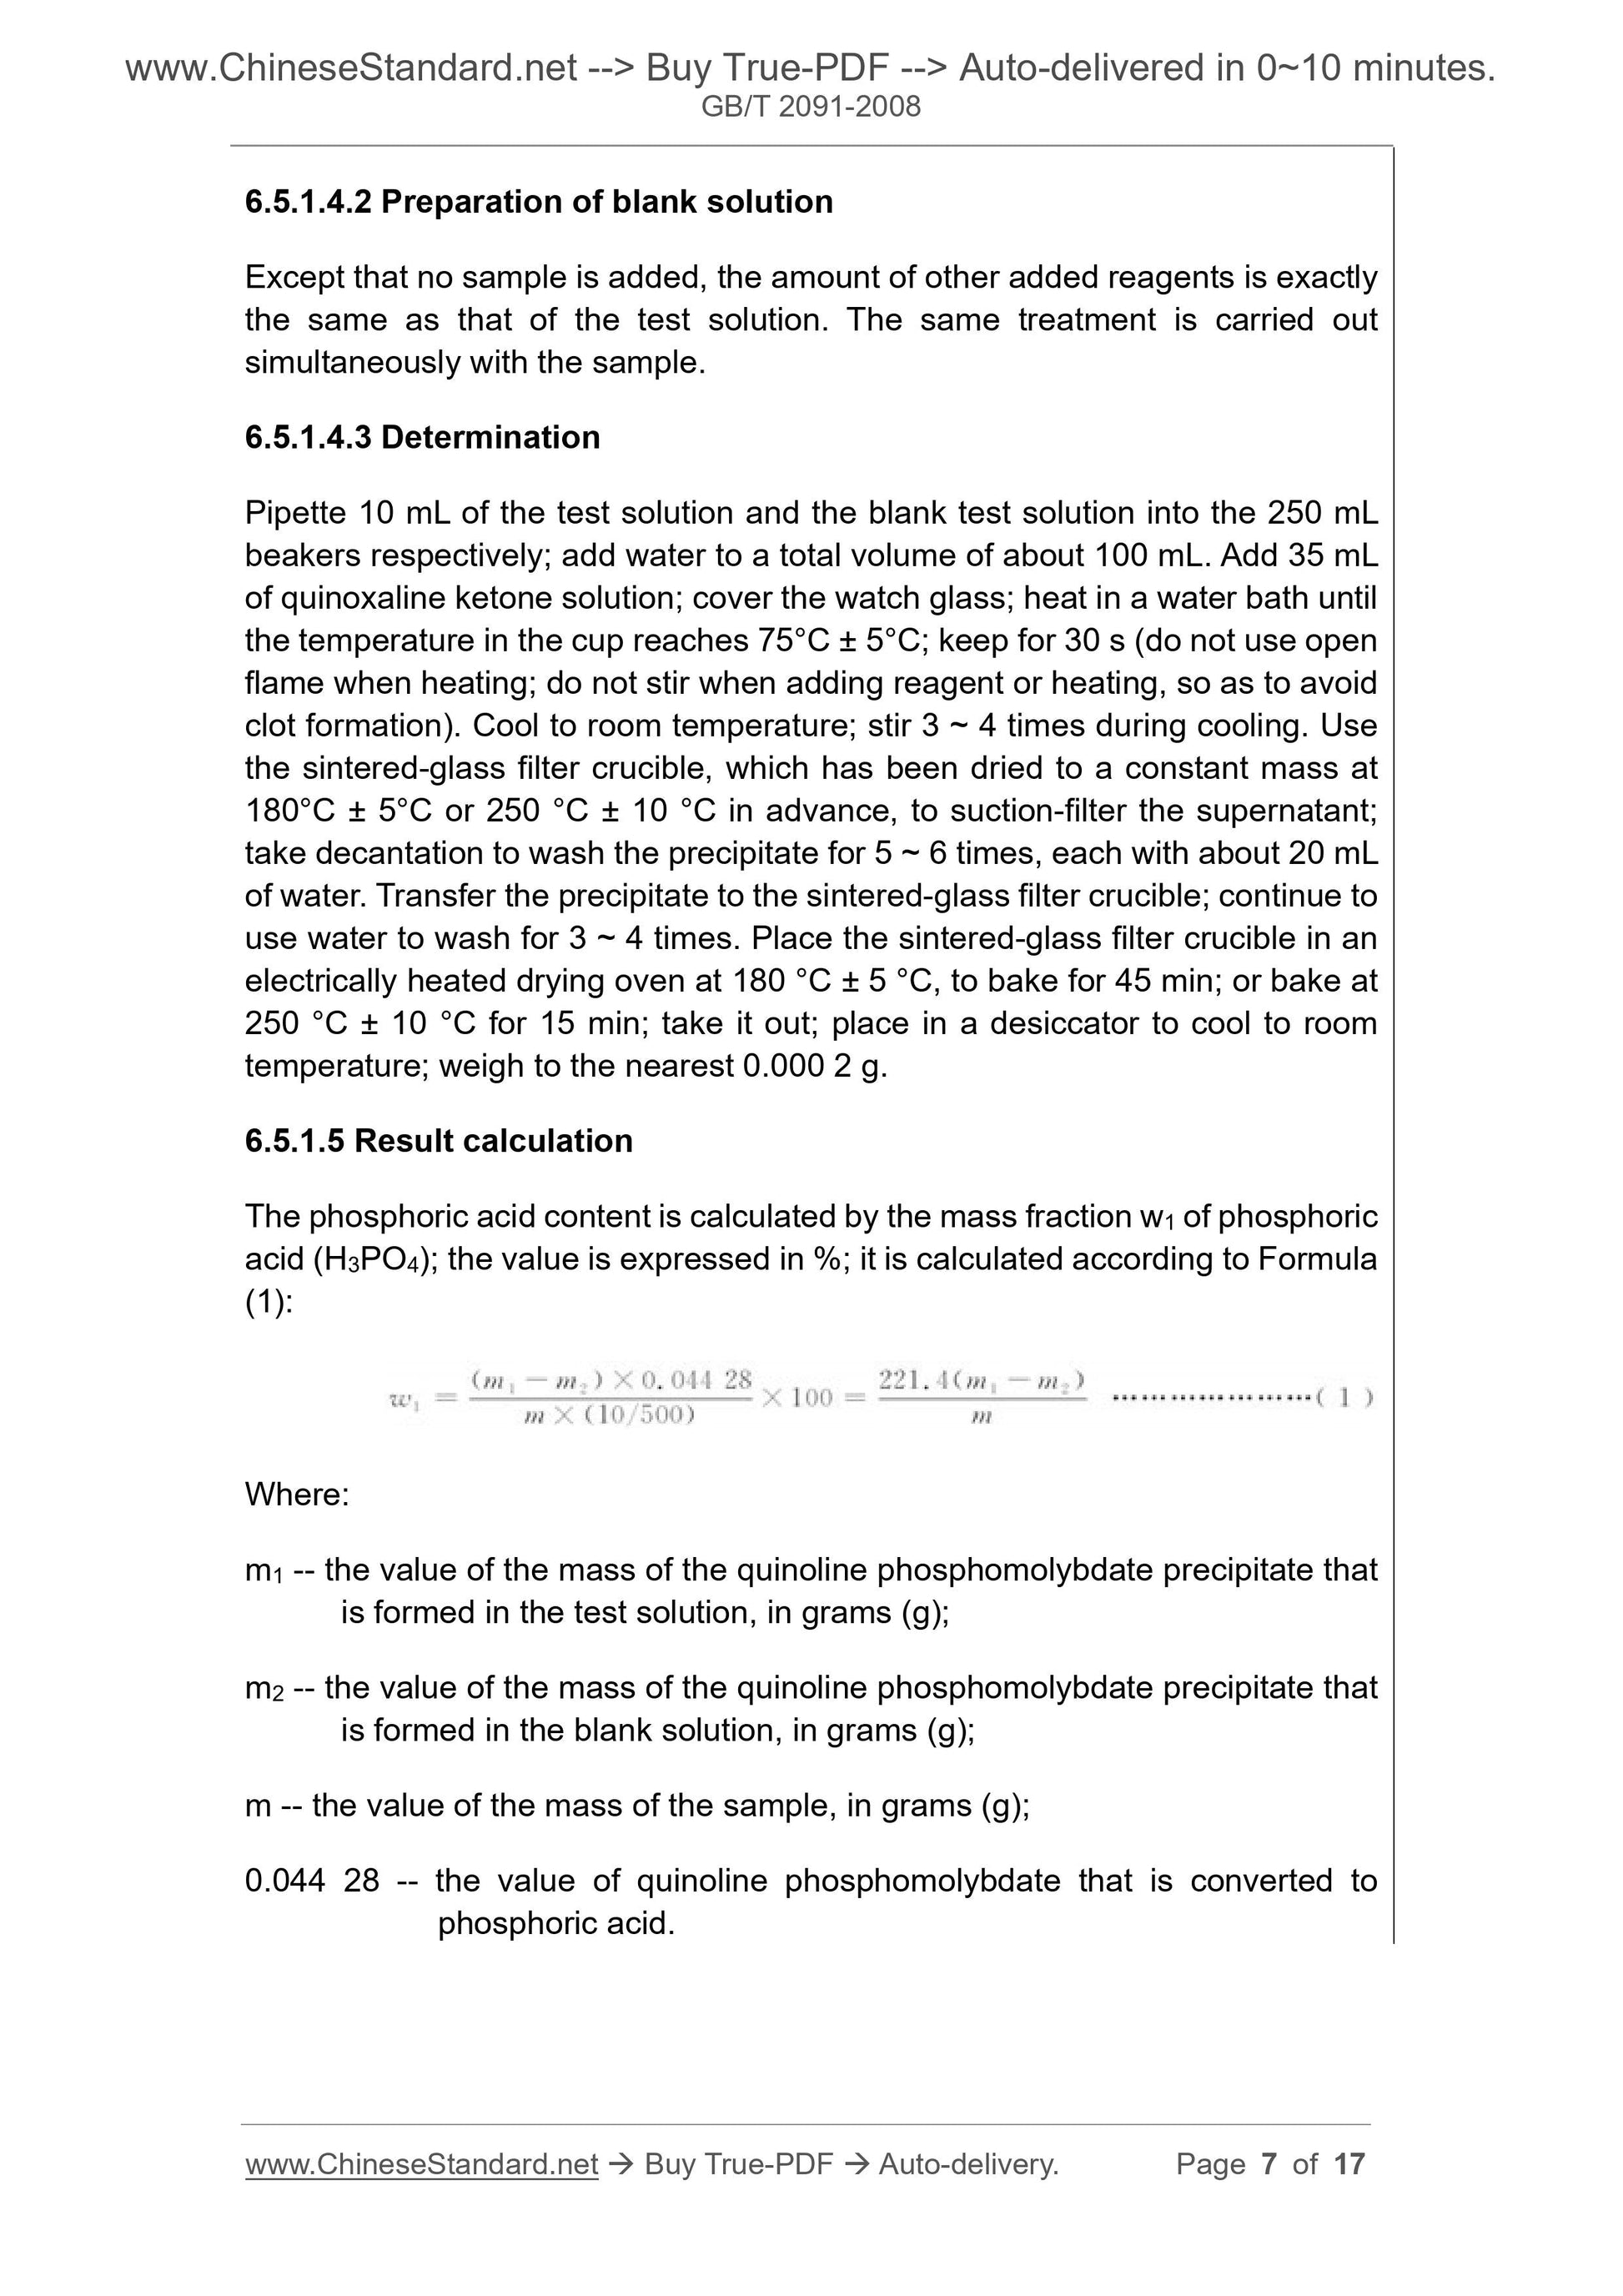 GB/T 2091-2008 Page 6